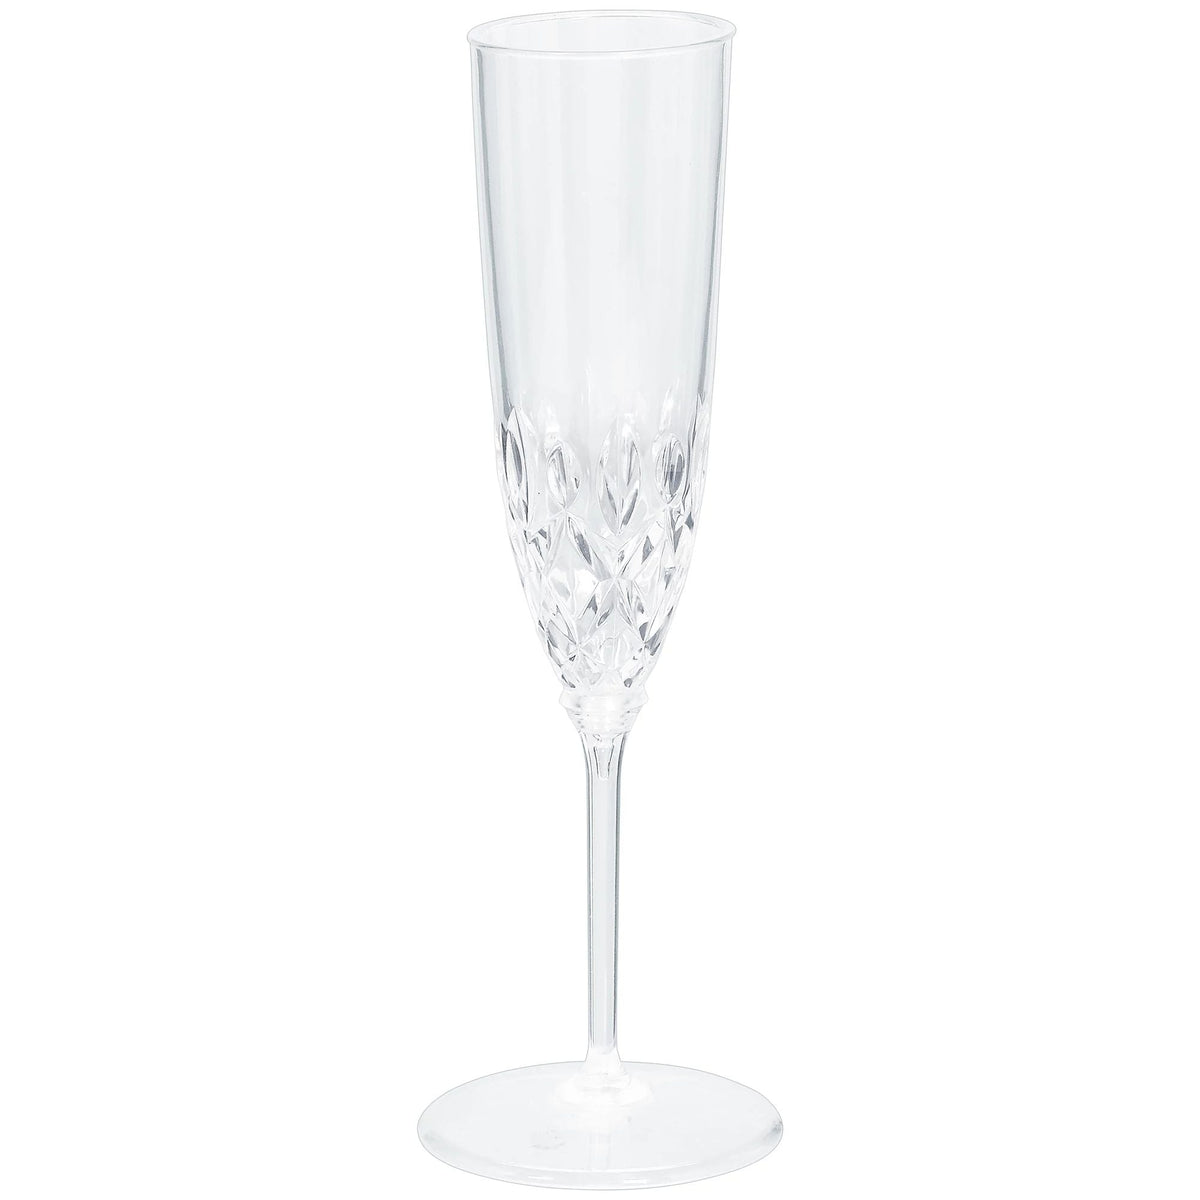 AMSCAN CA Disposable-Plasticware Clear Premium Crystal Look PET Plastic Champagne Flute, 20 Count